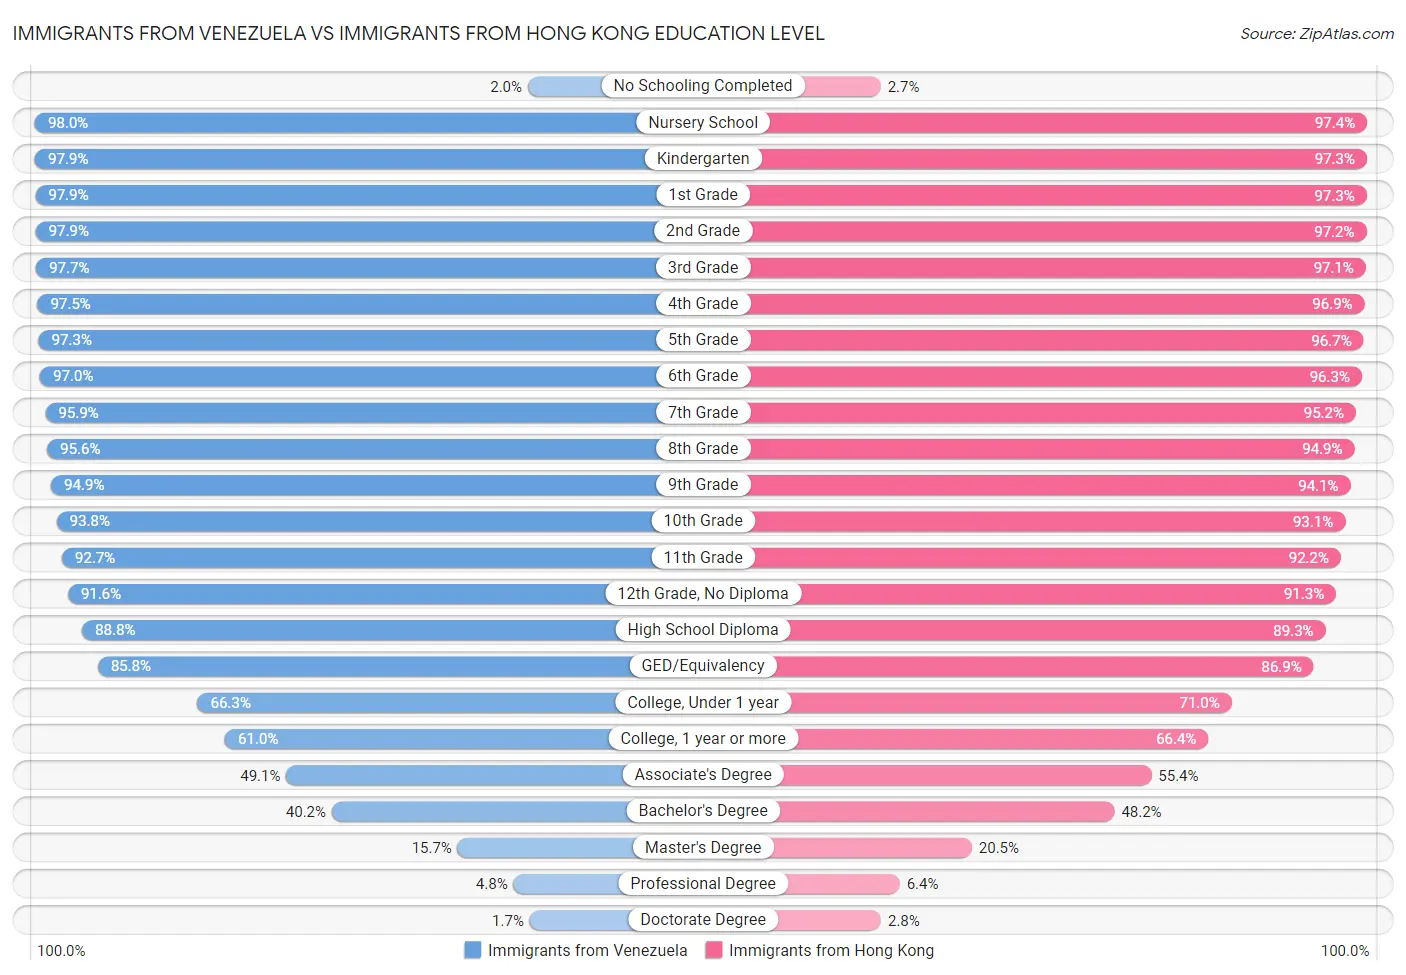 Immigrants from Venezuela vs Immigrants from Hong Kong Education Level